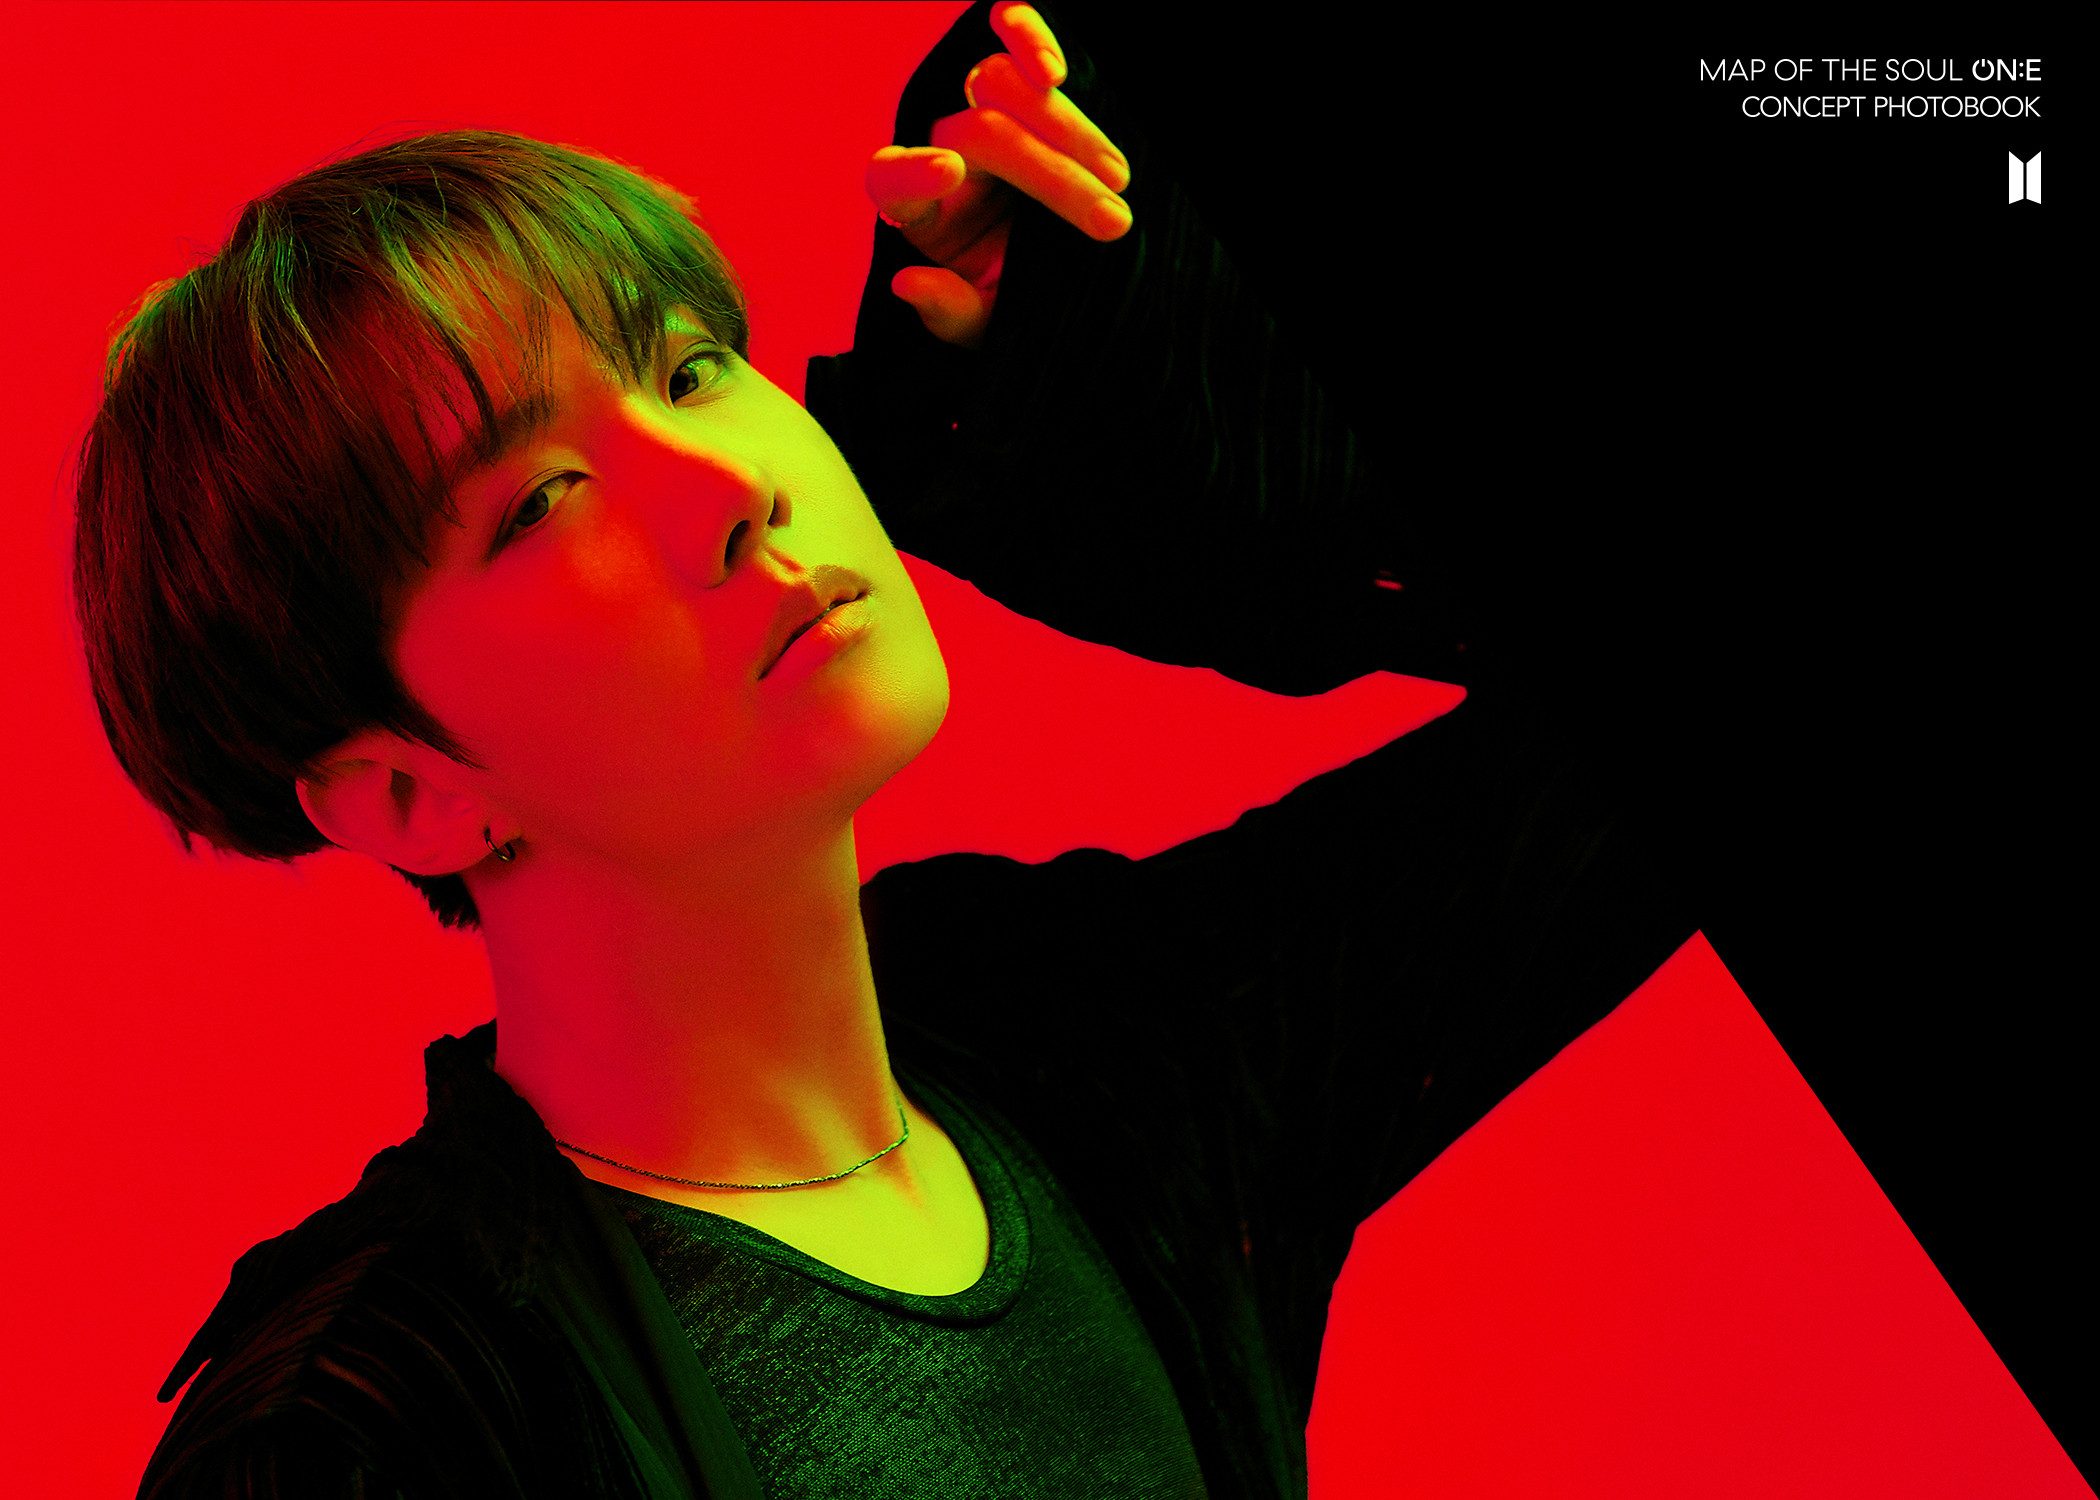 BTS J-Hope MAP OF THE SOUL ON:E CONCEPT PHOTOBOOK Clue - Shadow